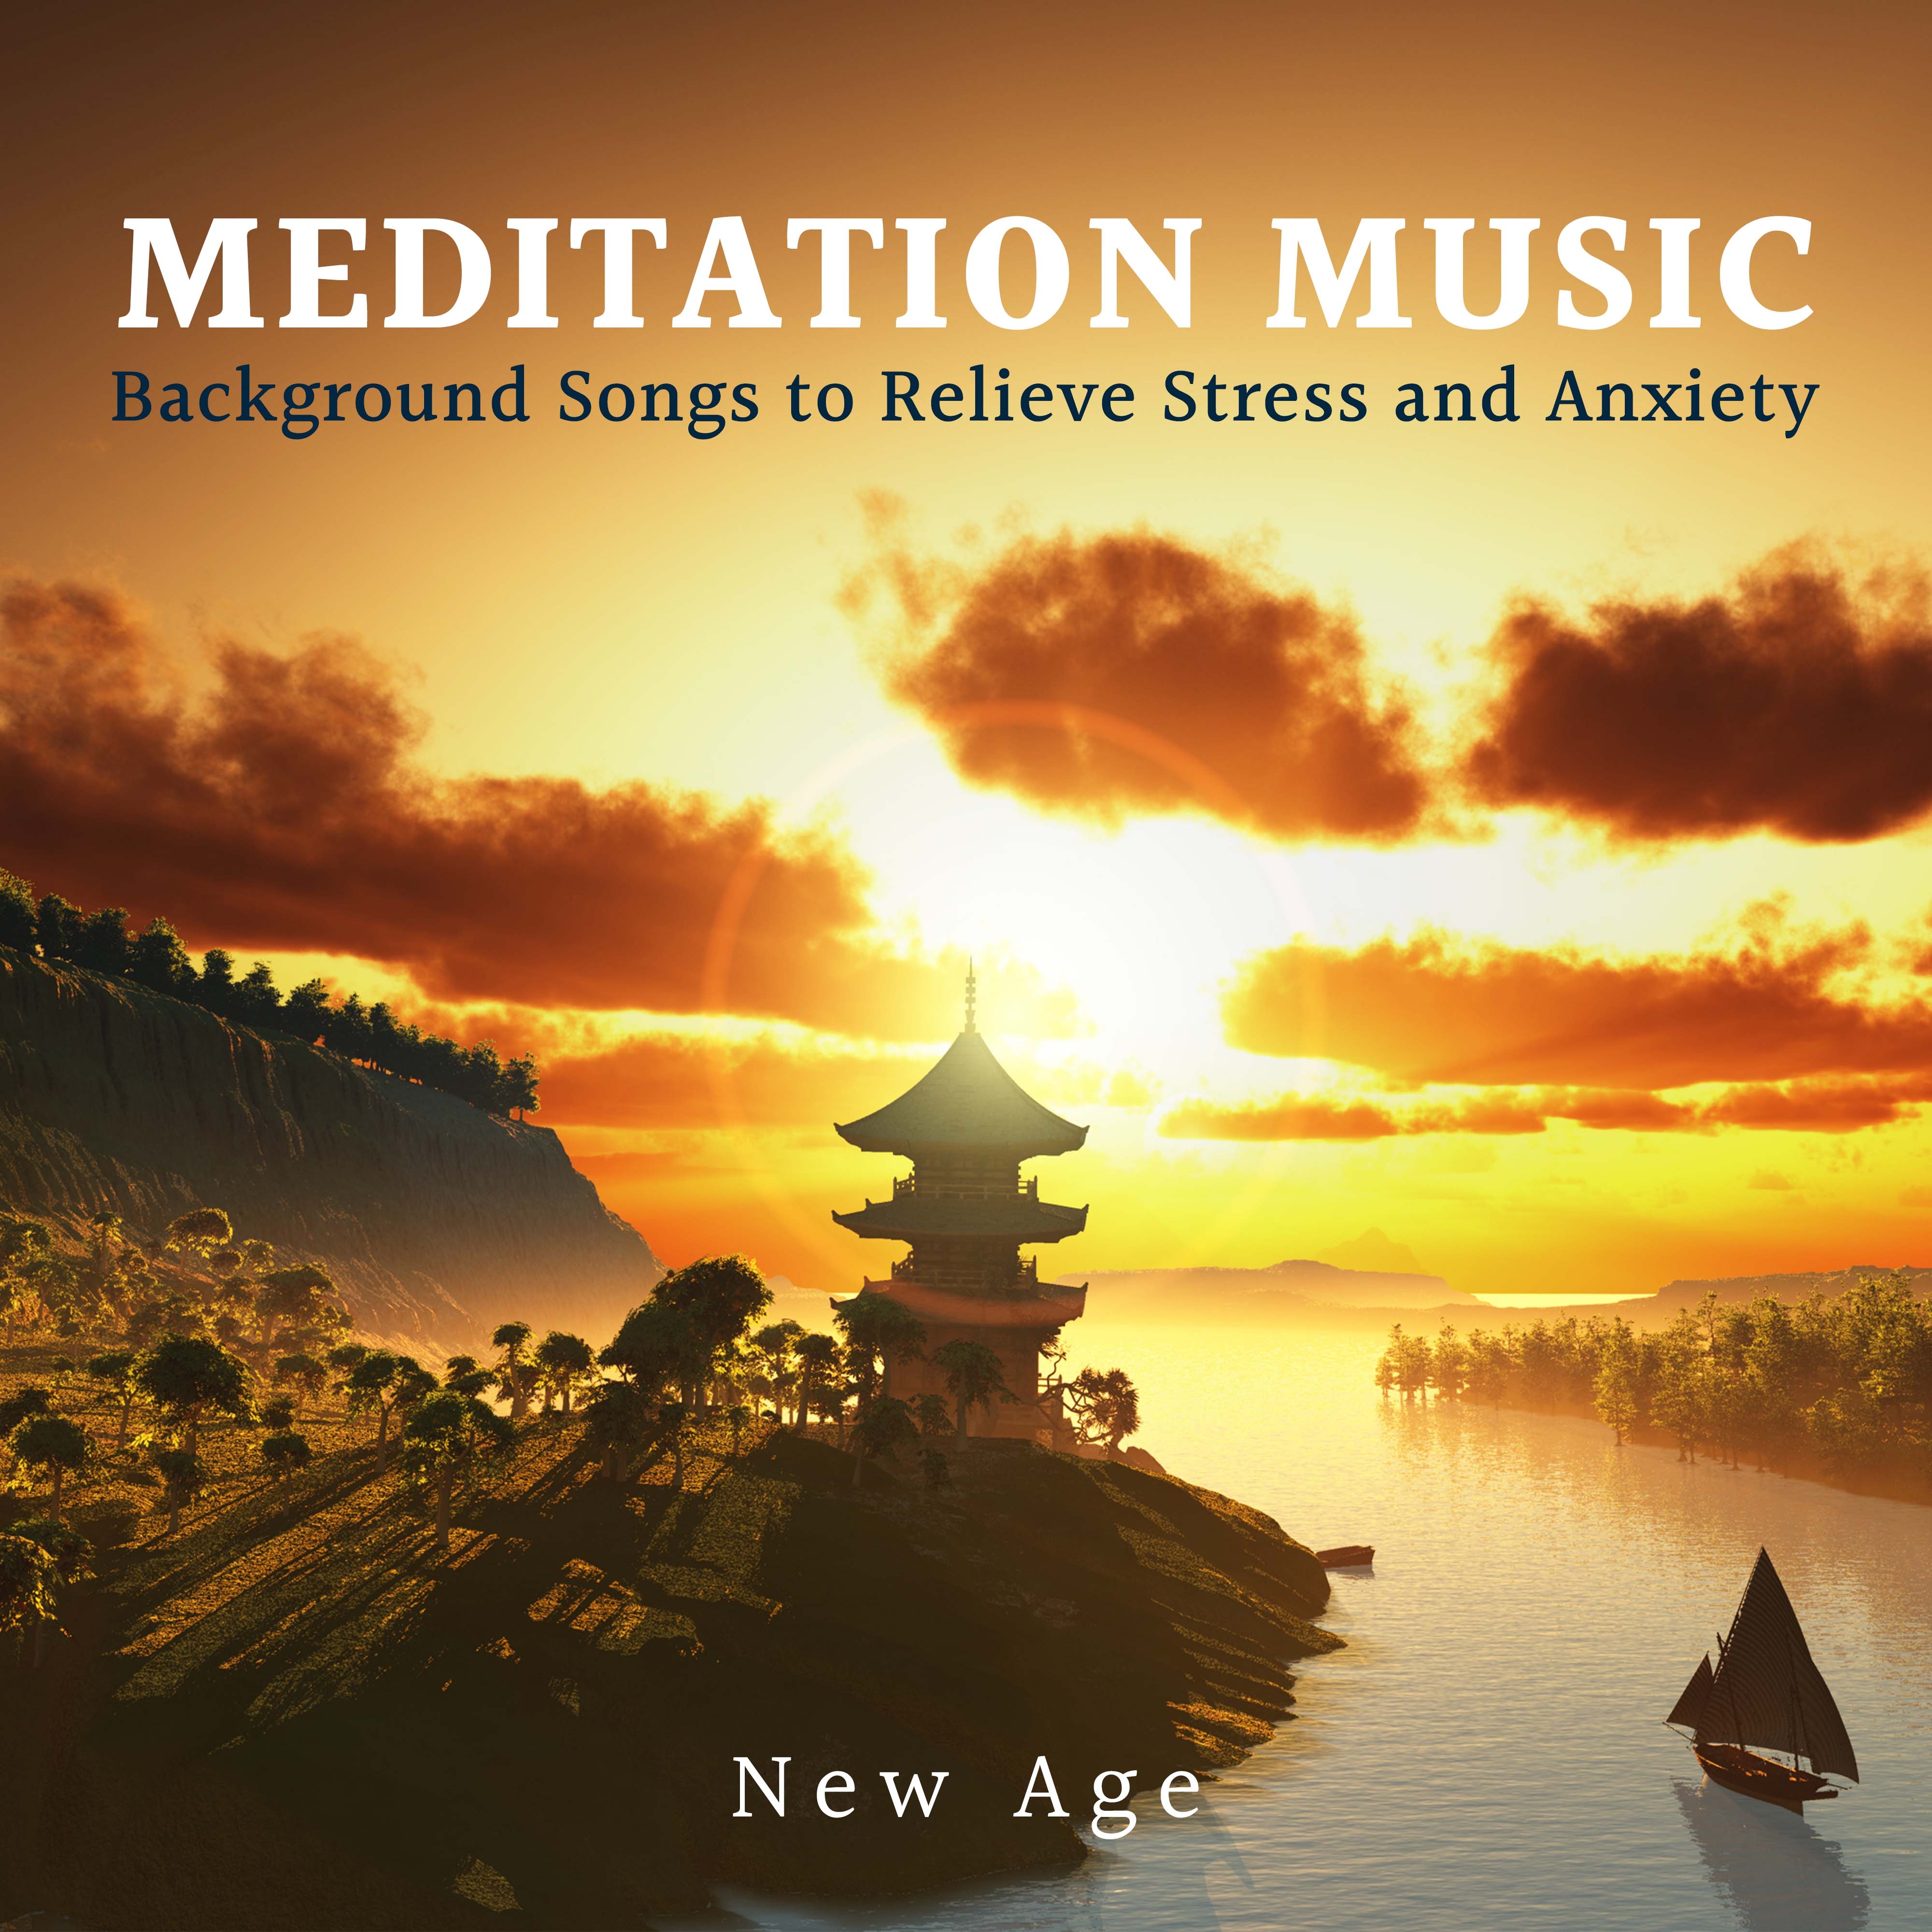 Meditation Music - Background Songs to Relieve Stress and Anxiety